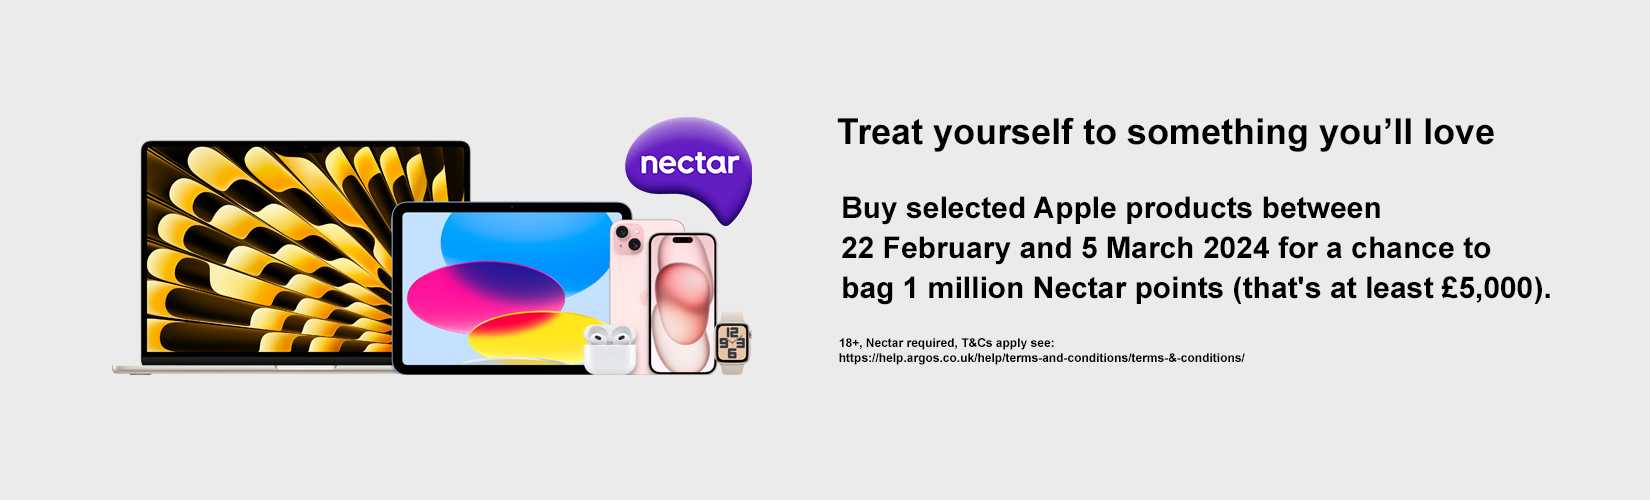 Treat yourself to something you'll love. Buy selected Apple products between 22 February and 5 March 2024 for a chance to bag 1 million Nectar points (that's at least £5,000).